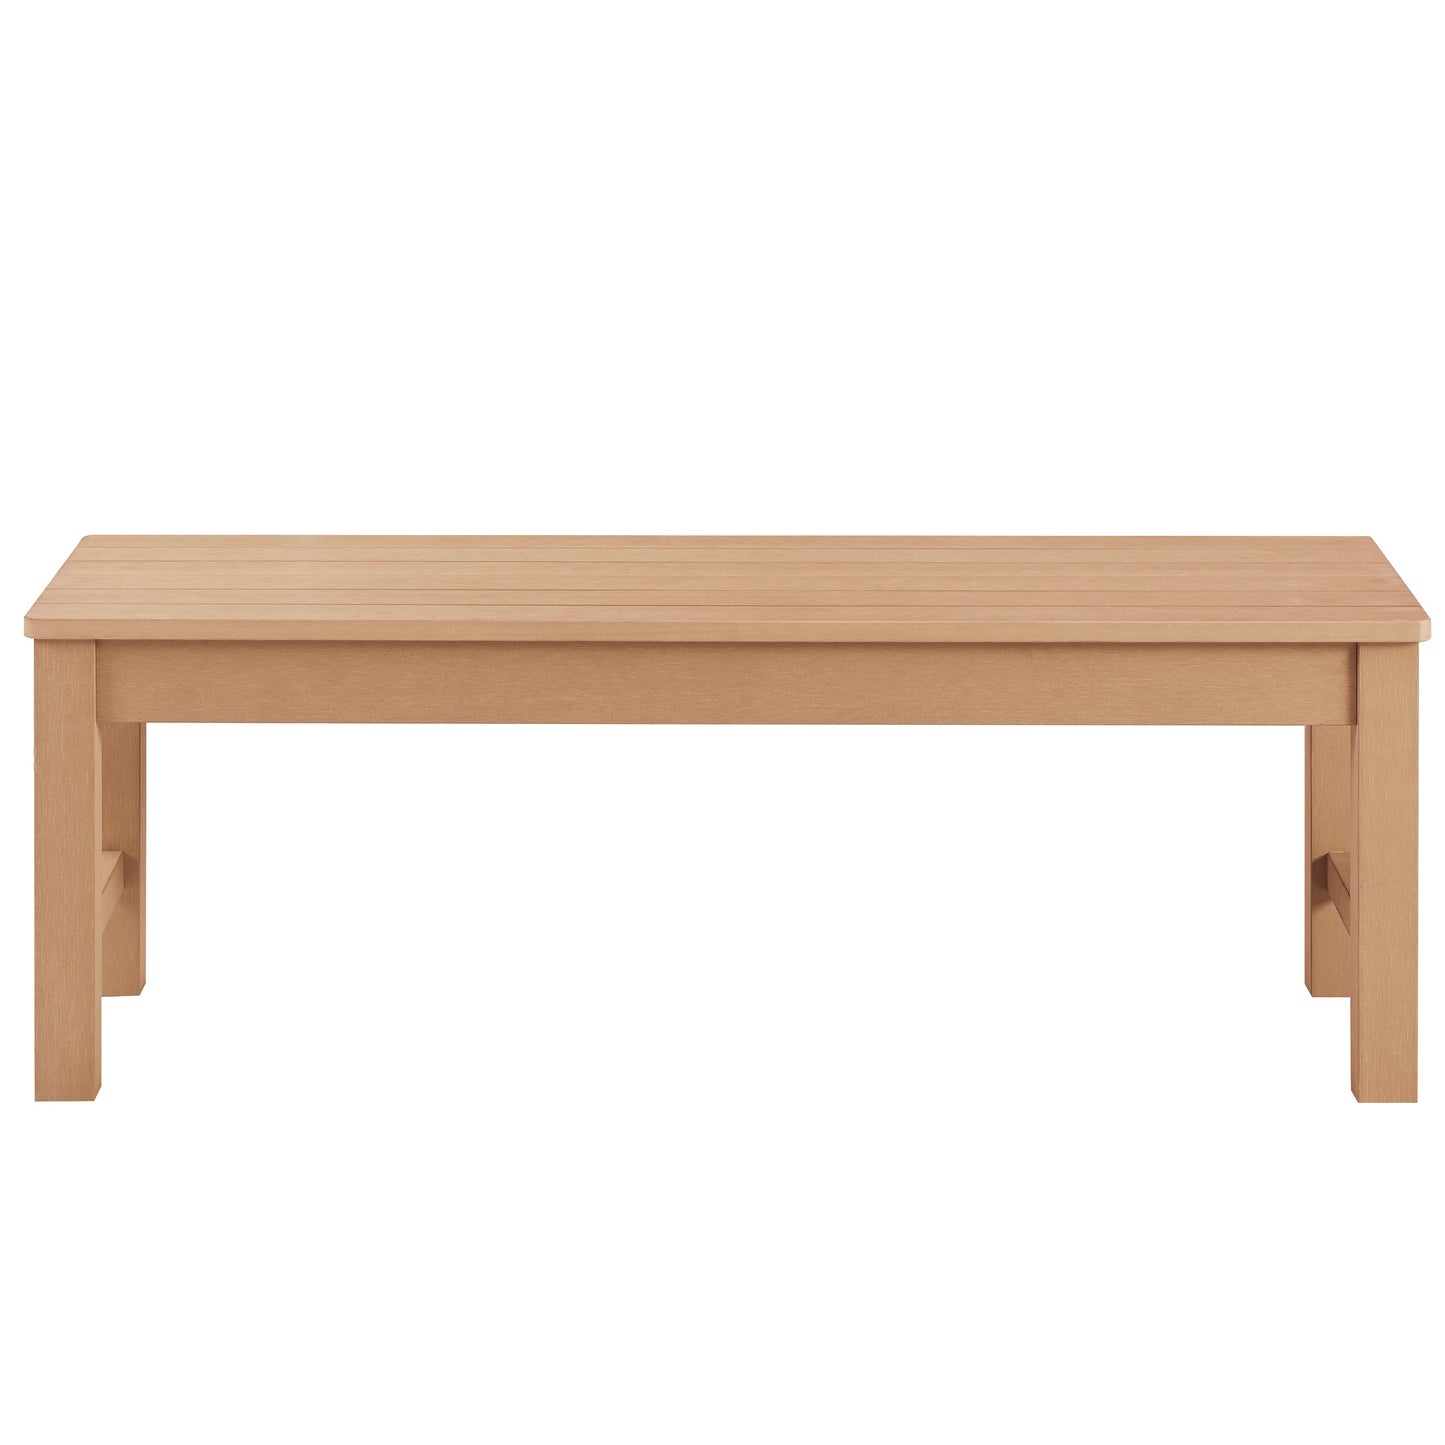 Winawood Backless 2 Seater Wood Effect Bench - New Teak